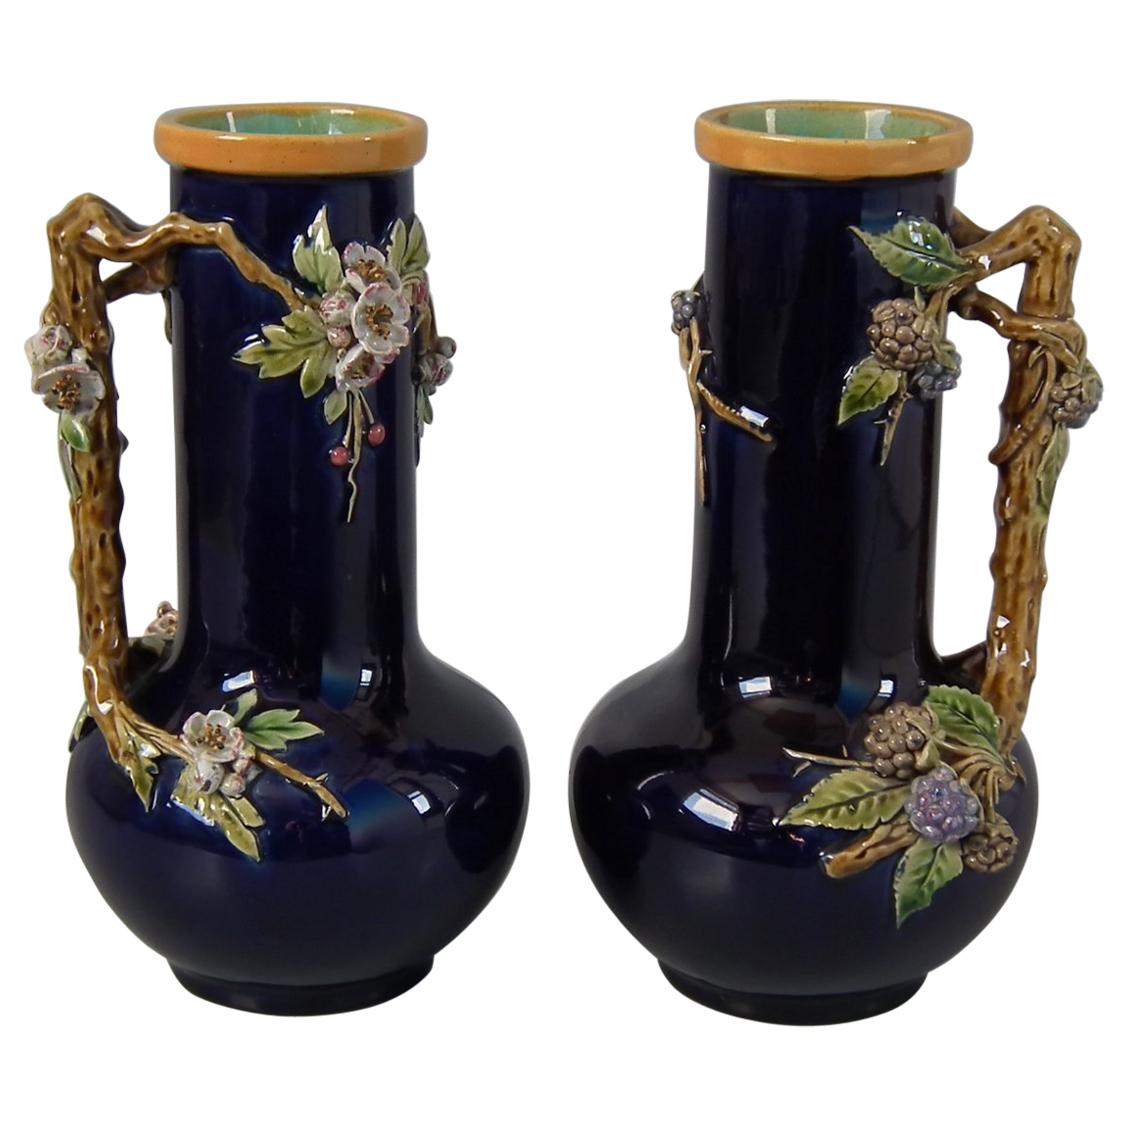 Pair of Minton Majolica Berry and Blossom Vases with Handles